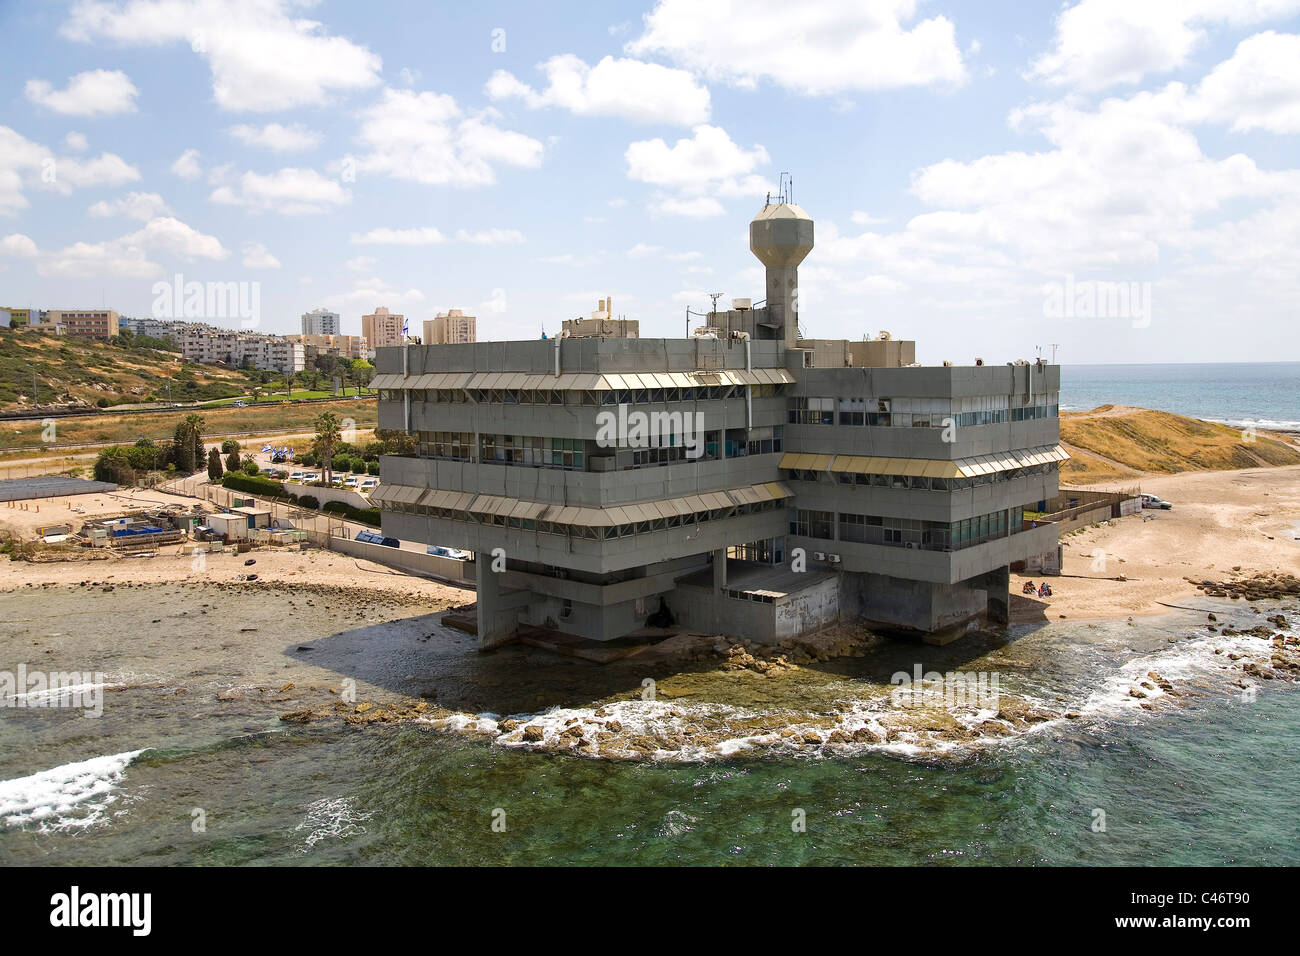 Aerial photograph of the Oceanographic Research Institution in the city of Haifa Stock Photo